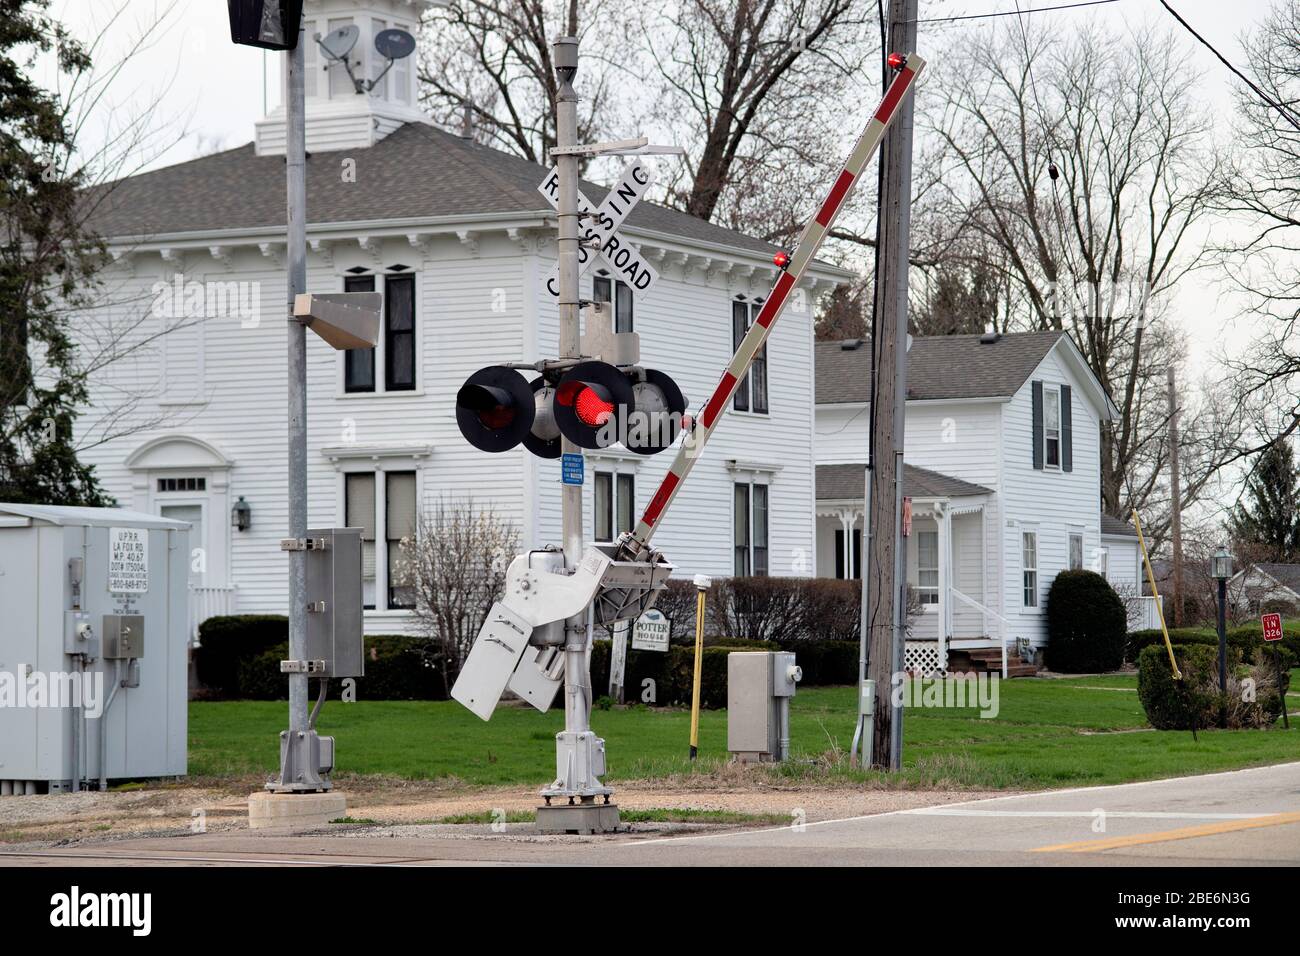 LaFox, Illinois, USA. A road crossing gate descends with flashing red lights to warn motorists of an upcoming freight train. Stock Photo